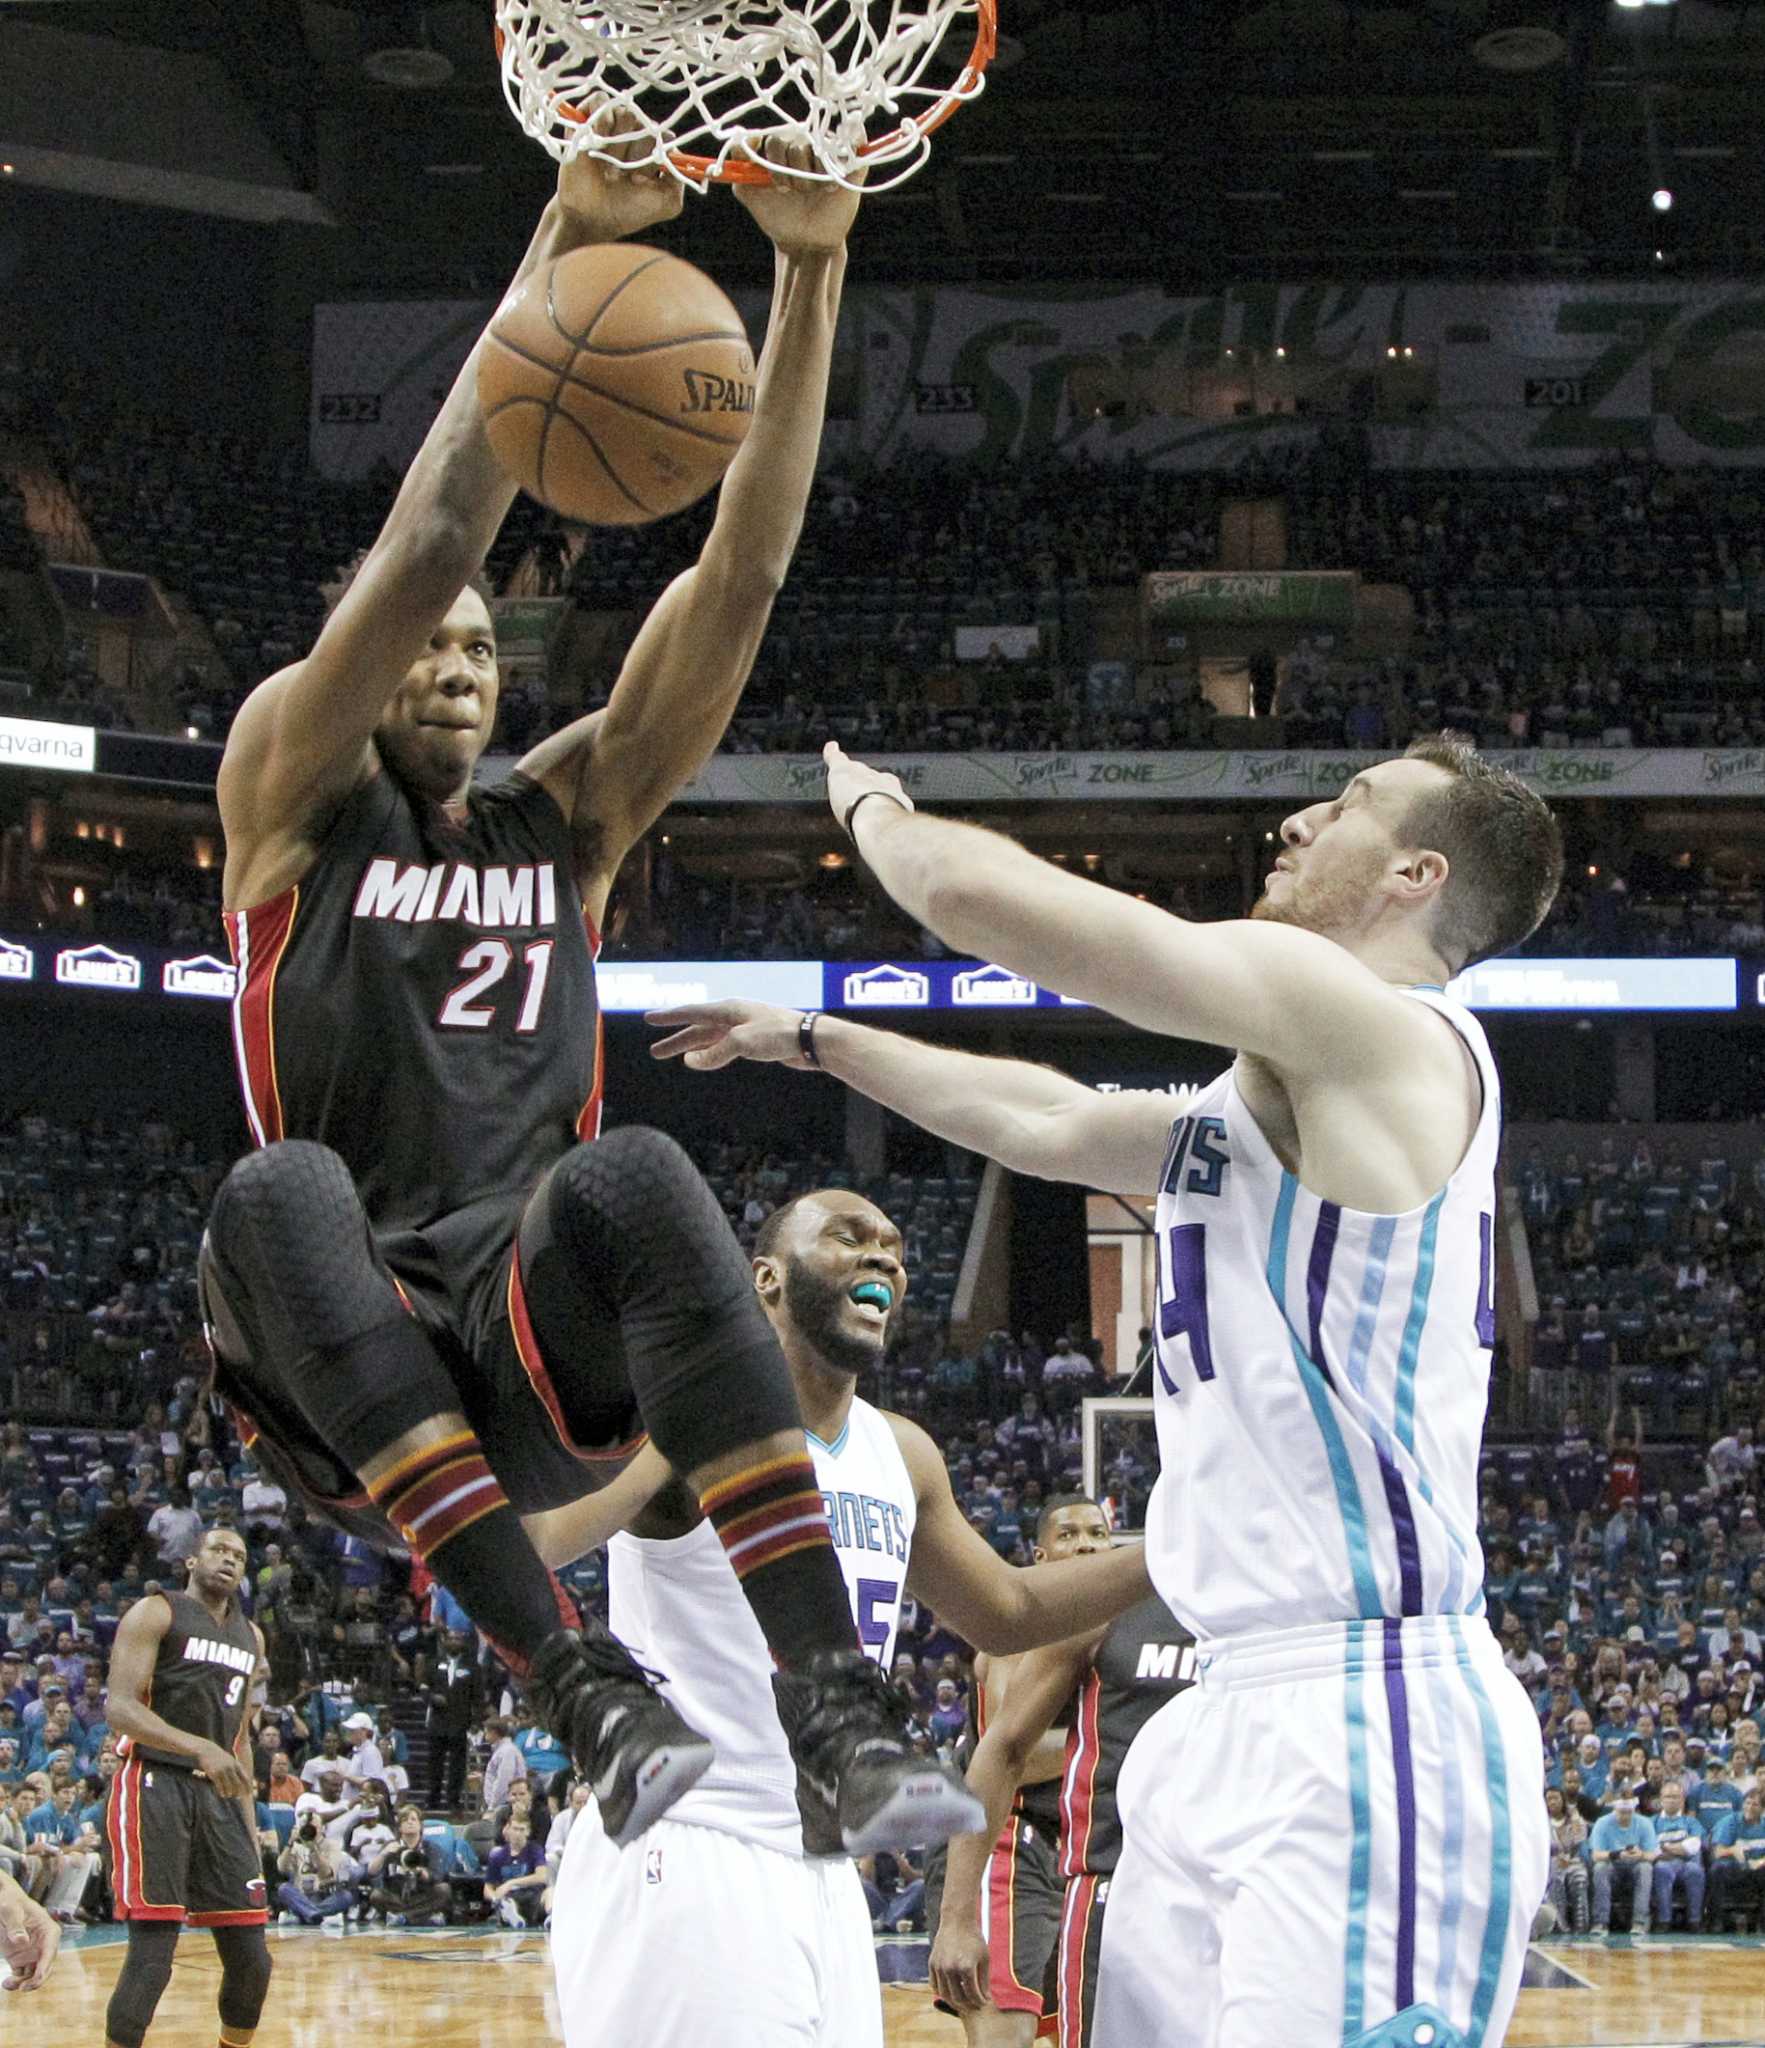 Mavericks will meet with Hassan Whiteside on July 1, per report